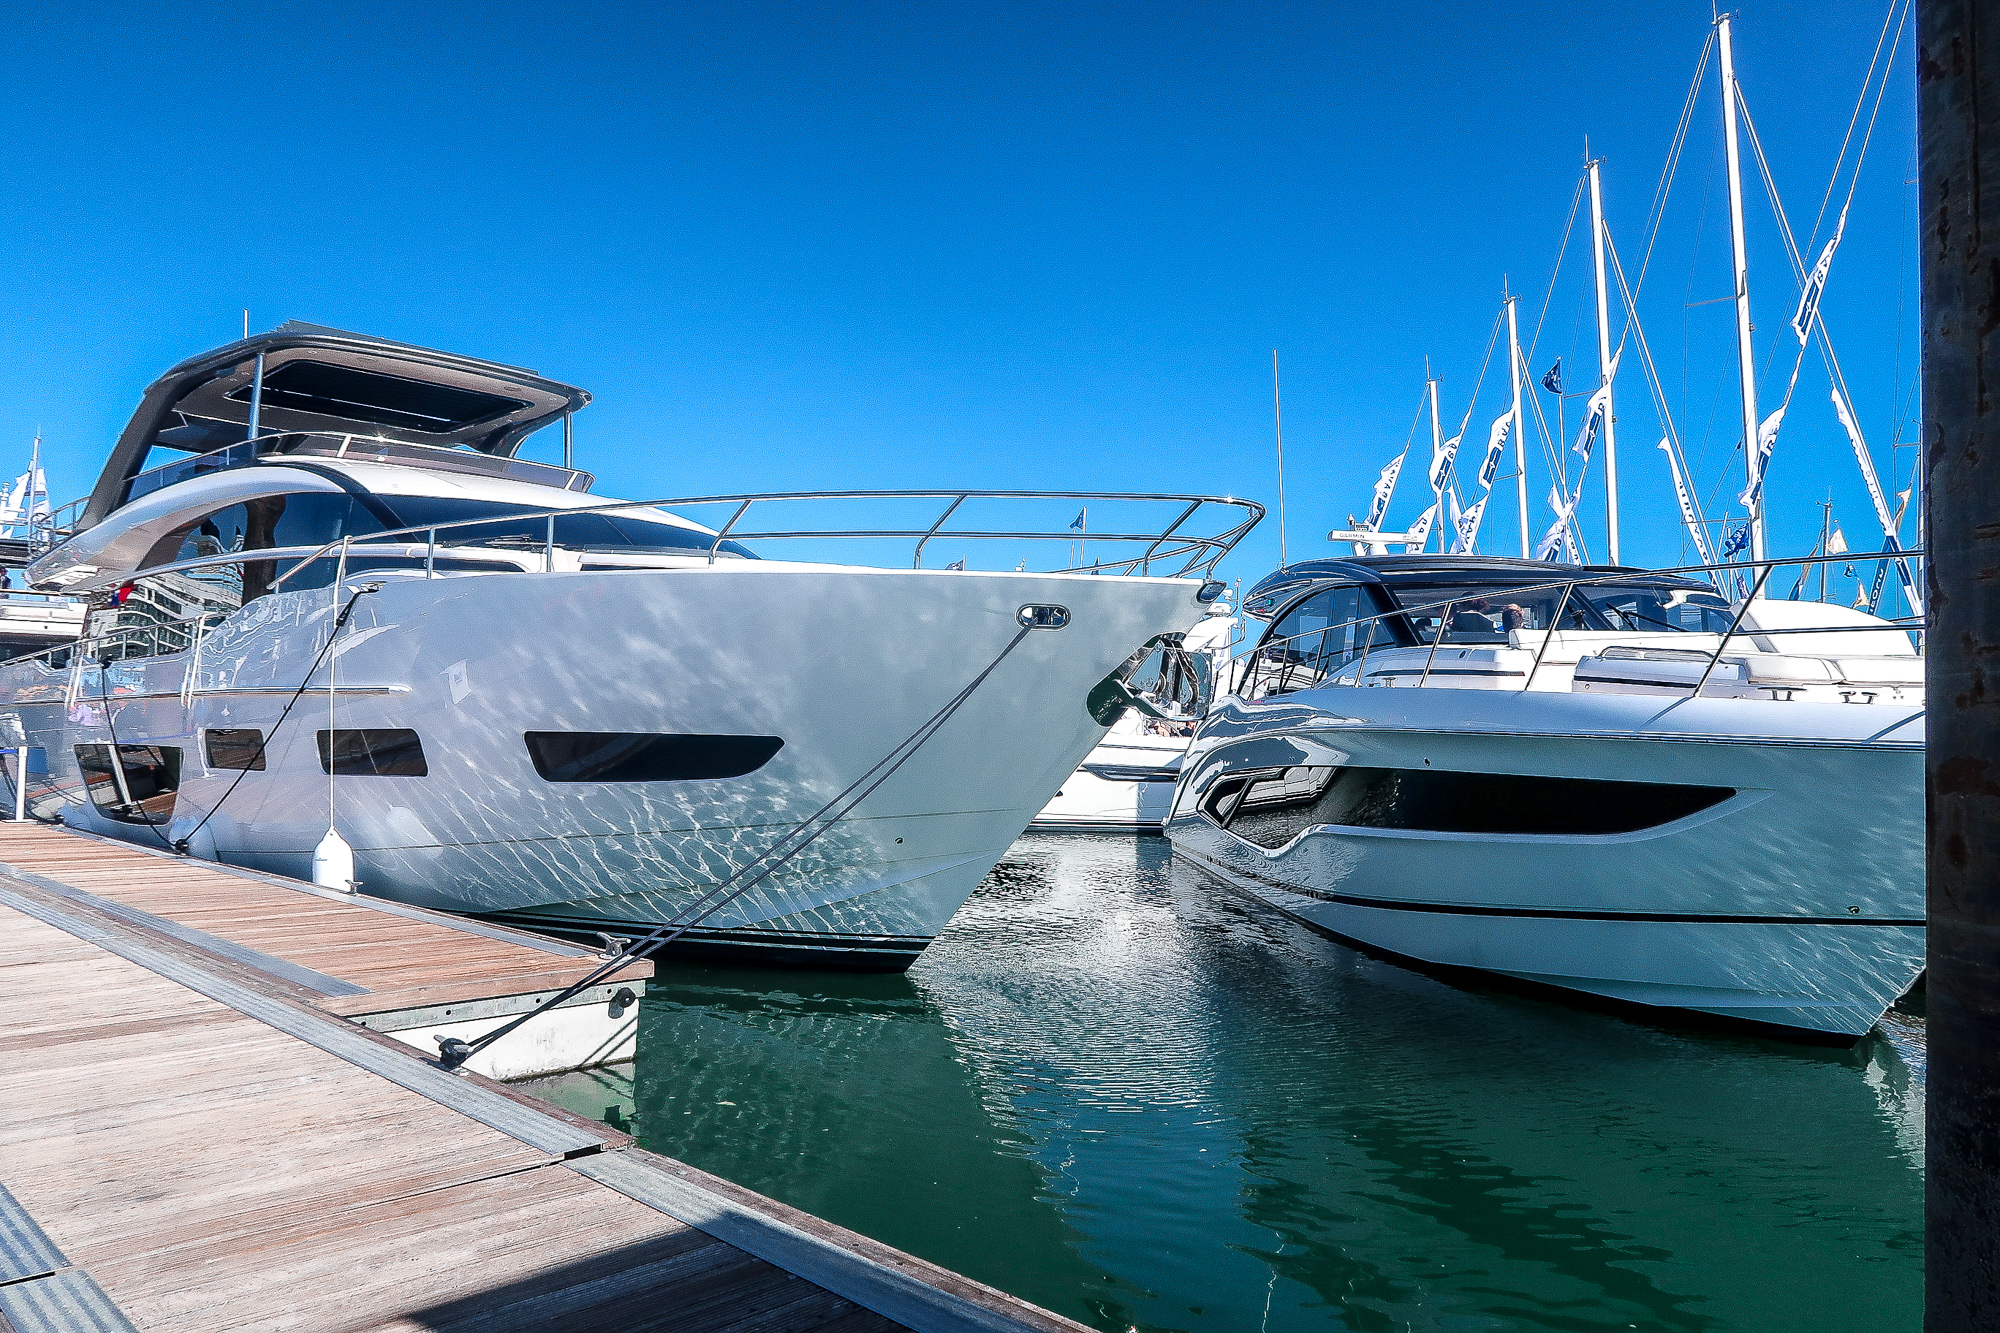 Southampton Boat Show: How To Get Discounted Tickets 24